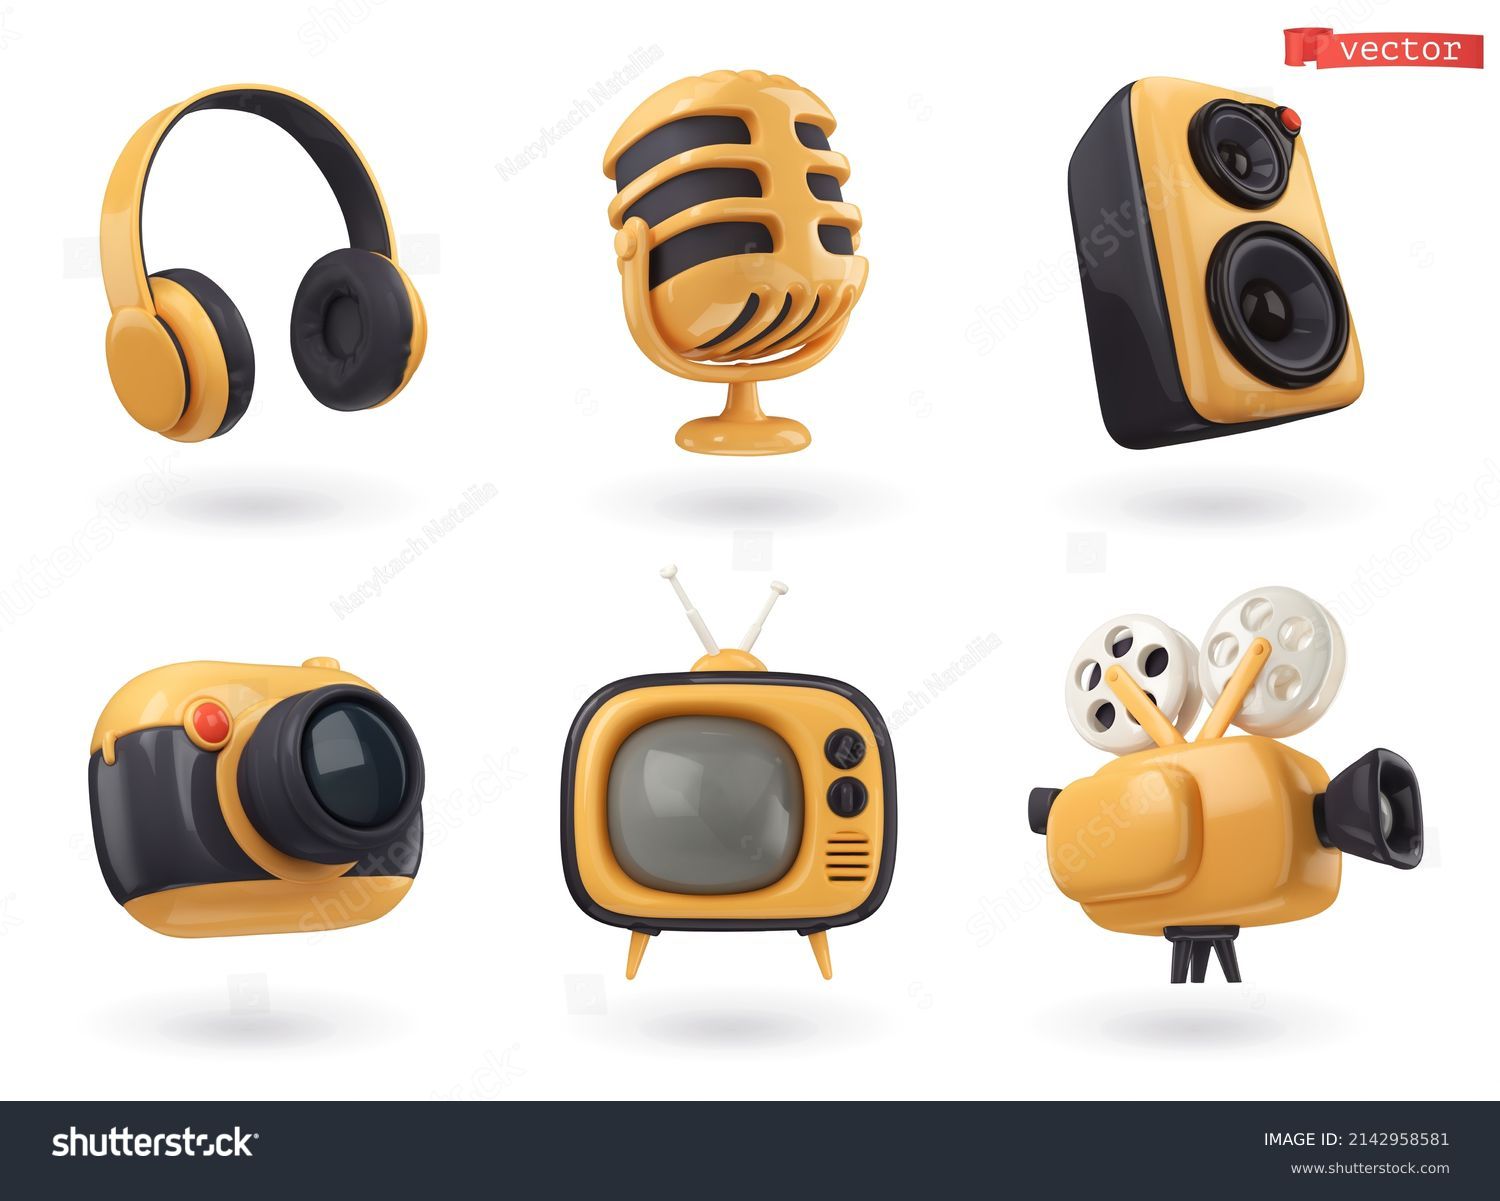 3d icon set audio and video. Headphones, microphone, speaker, camera, retro TV, film projector. Realistic render vector objects Stock Vector